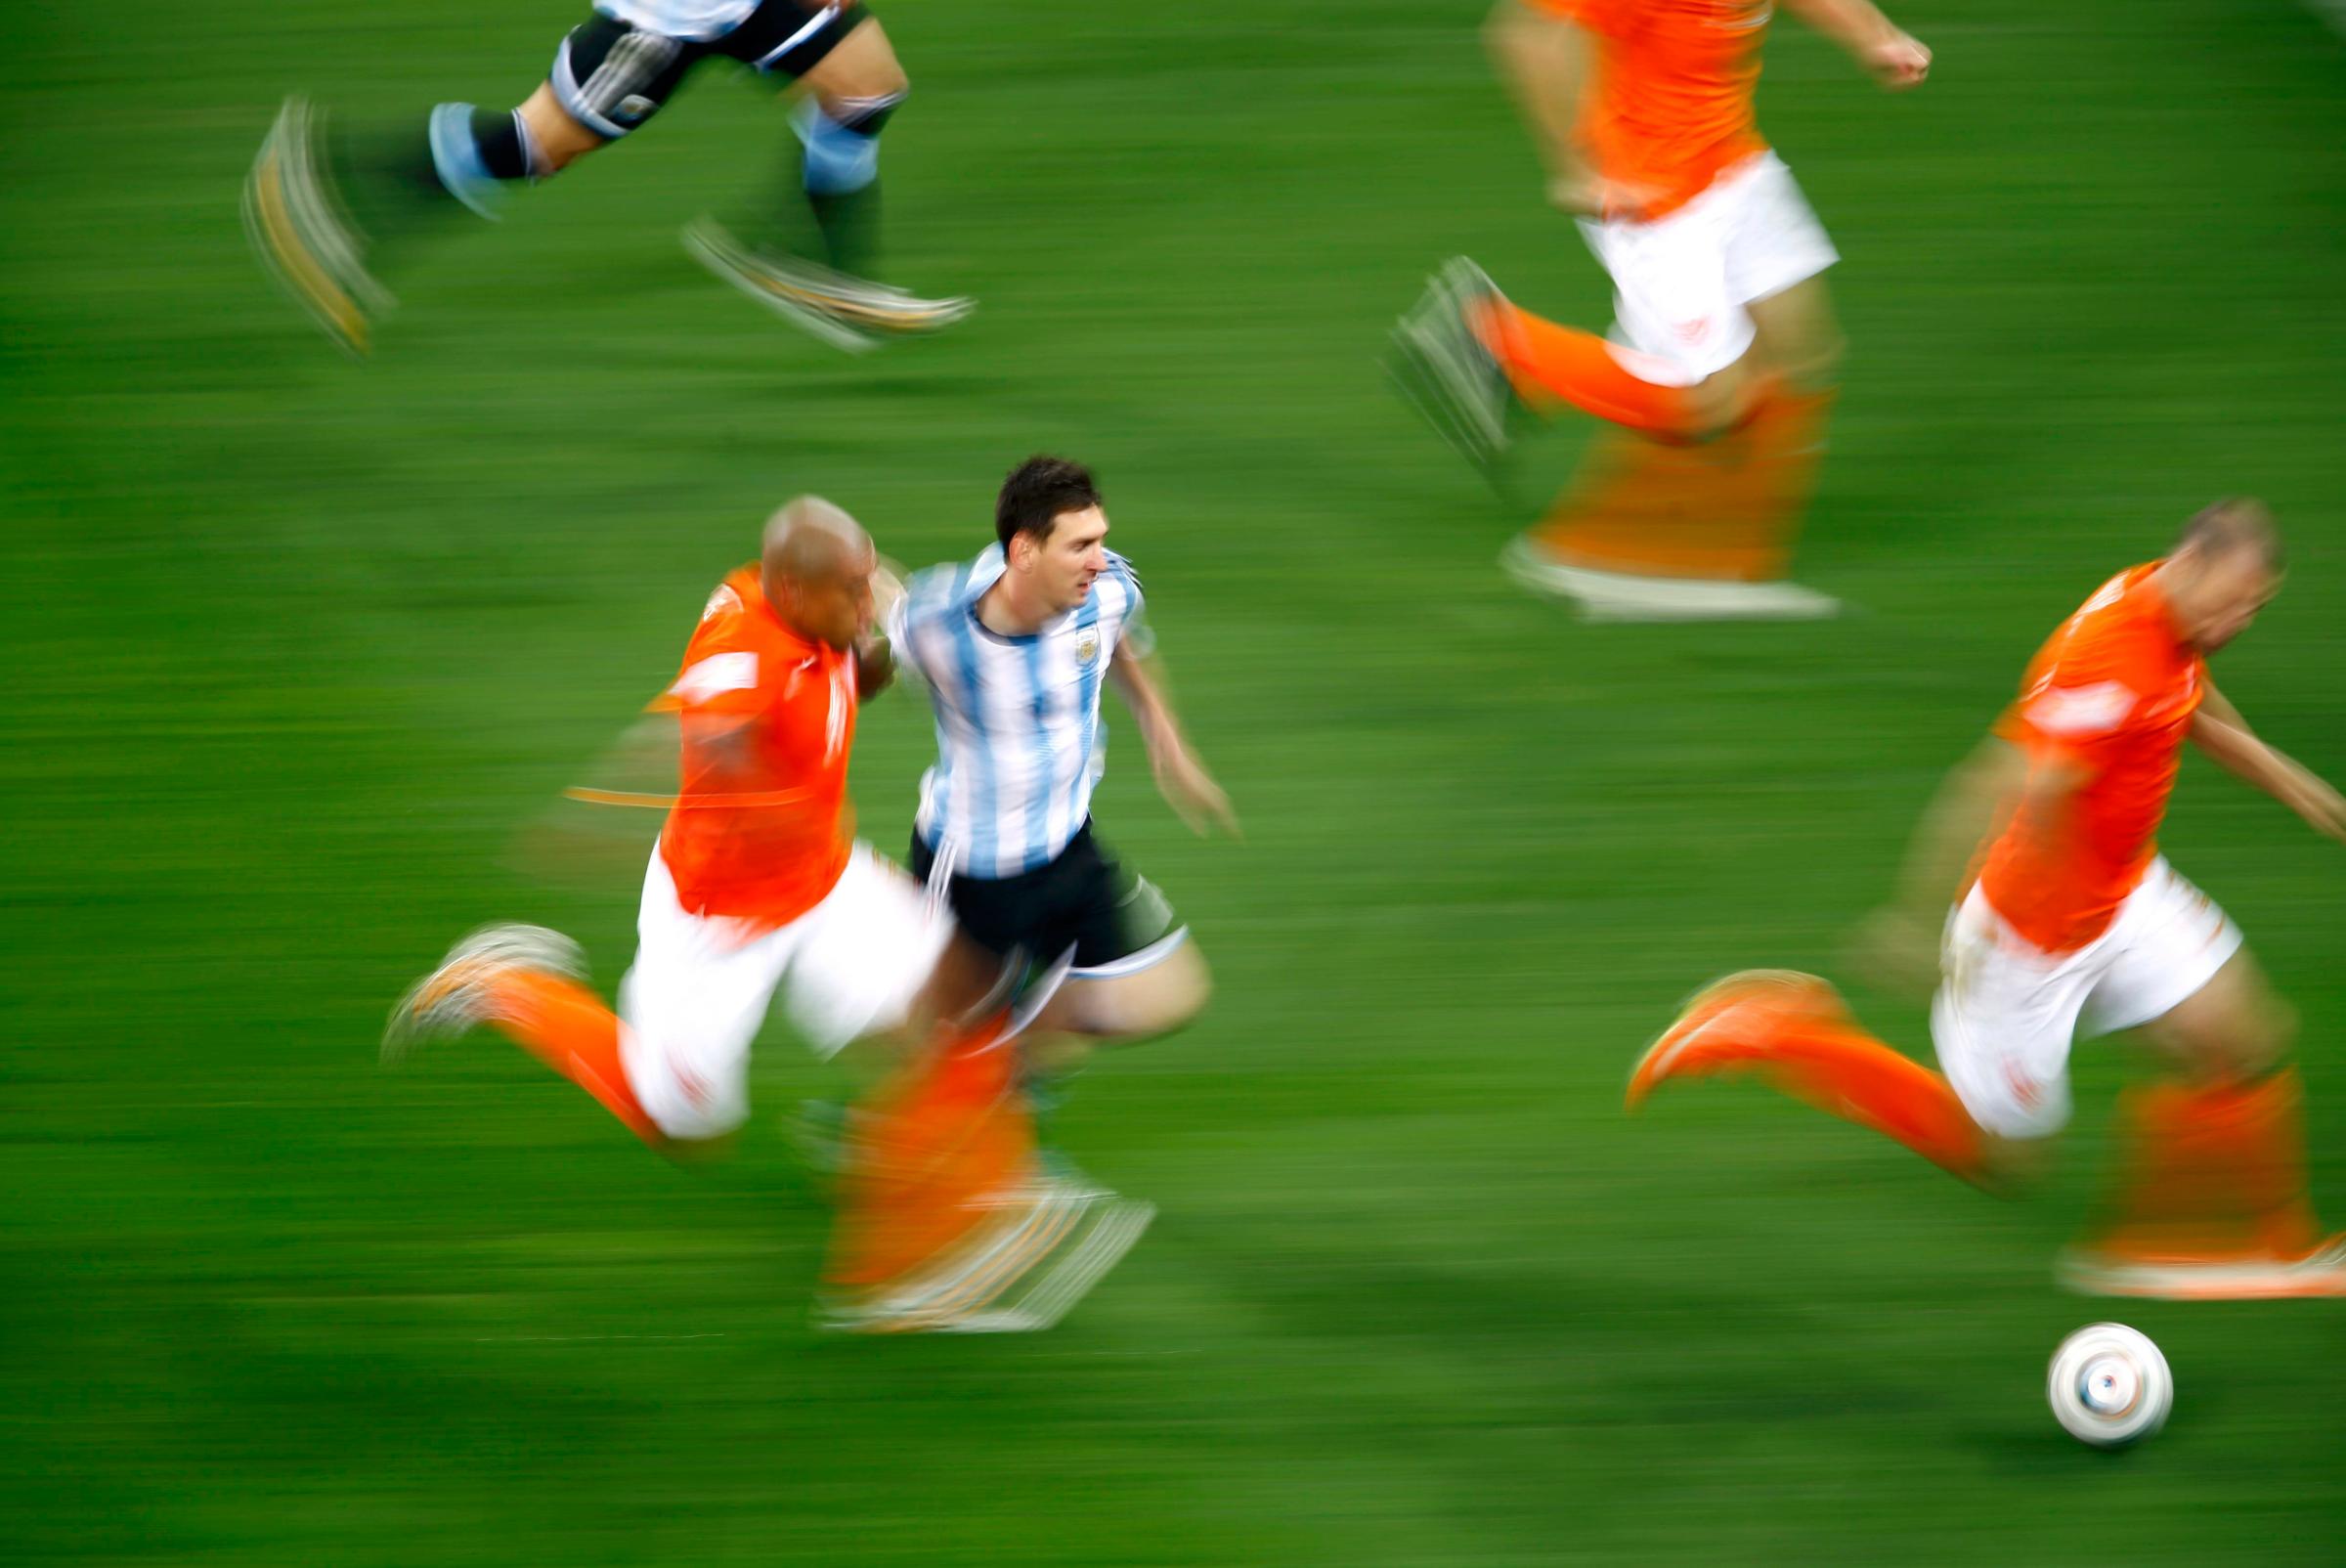 Argentina's Lionel Messi fights for the ball with Nigel de Jong of the Netherlands during their 2014 World Cup semi-finals at the Corinthians arena